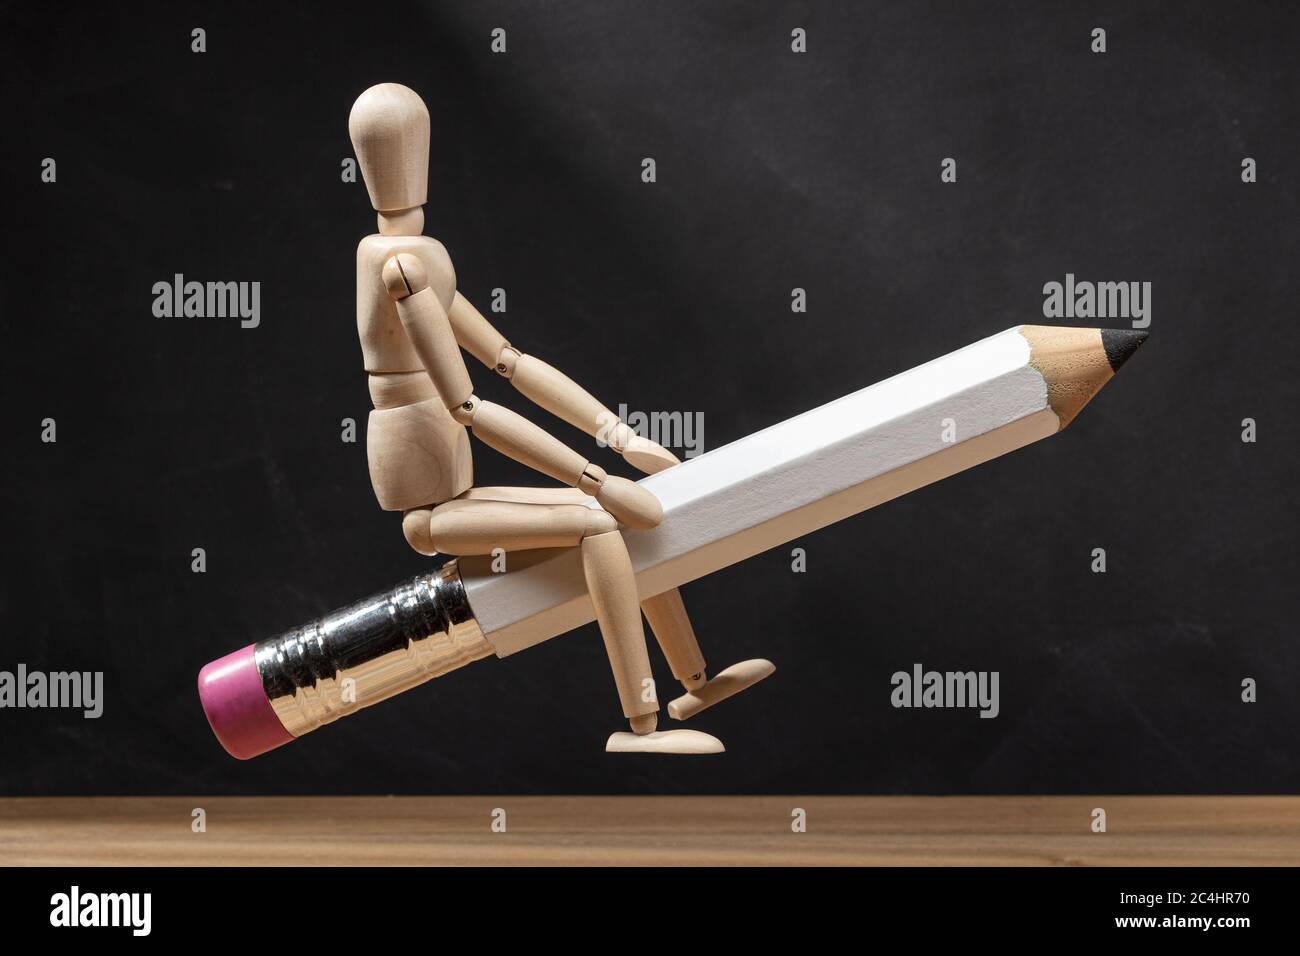 Wooden mannequin riding a pencil like a rocket. Back to school concept. Copy space Stock Photo